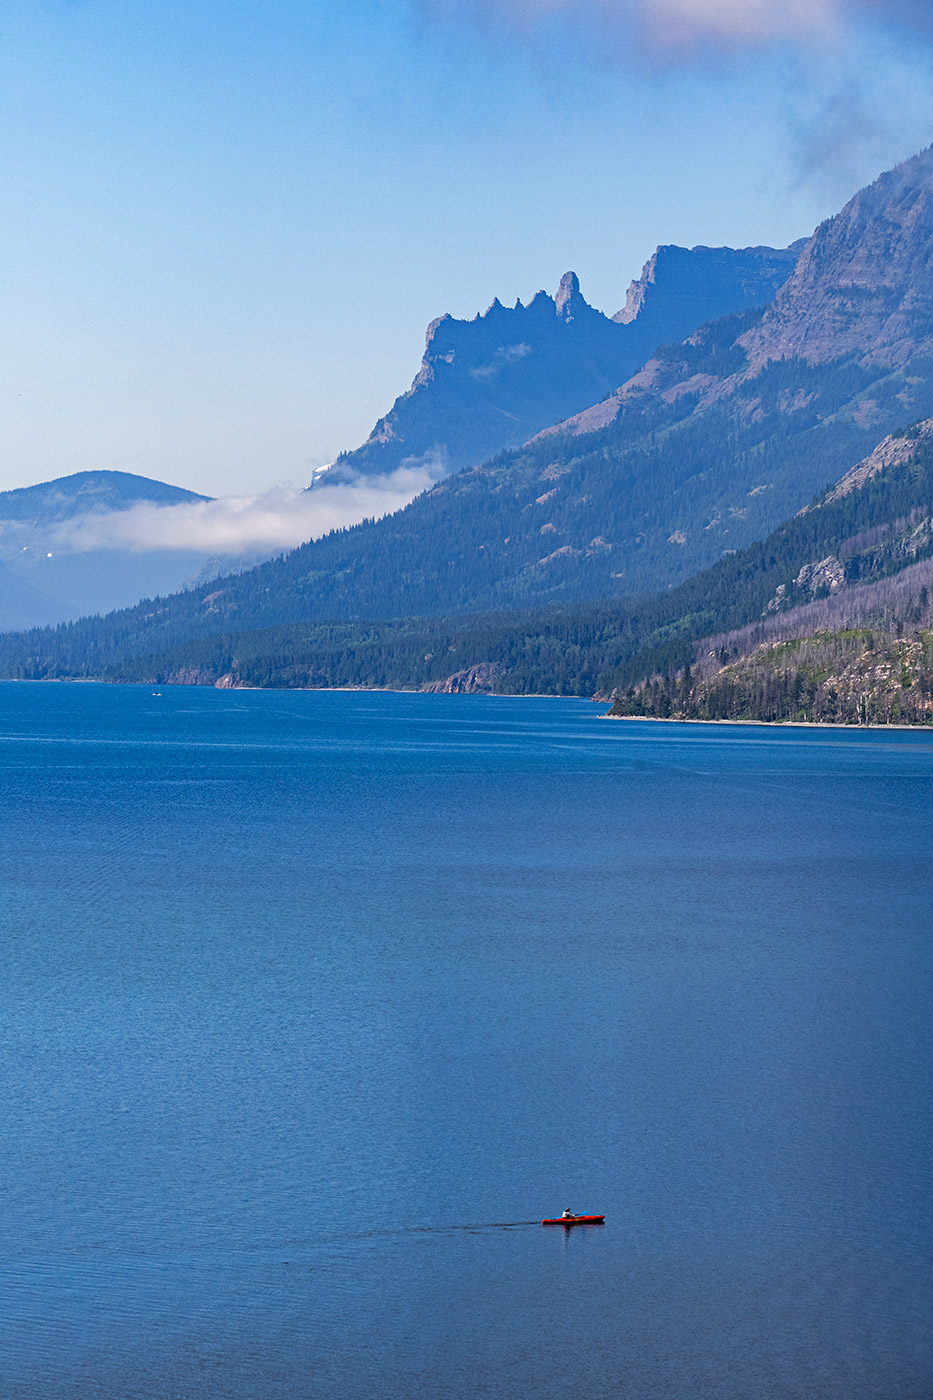 Upper Waterton Lake (and kayaker) with the International boundary and Montana in the distance.